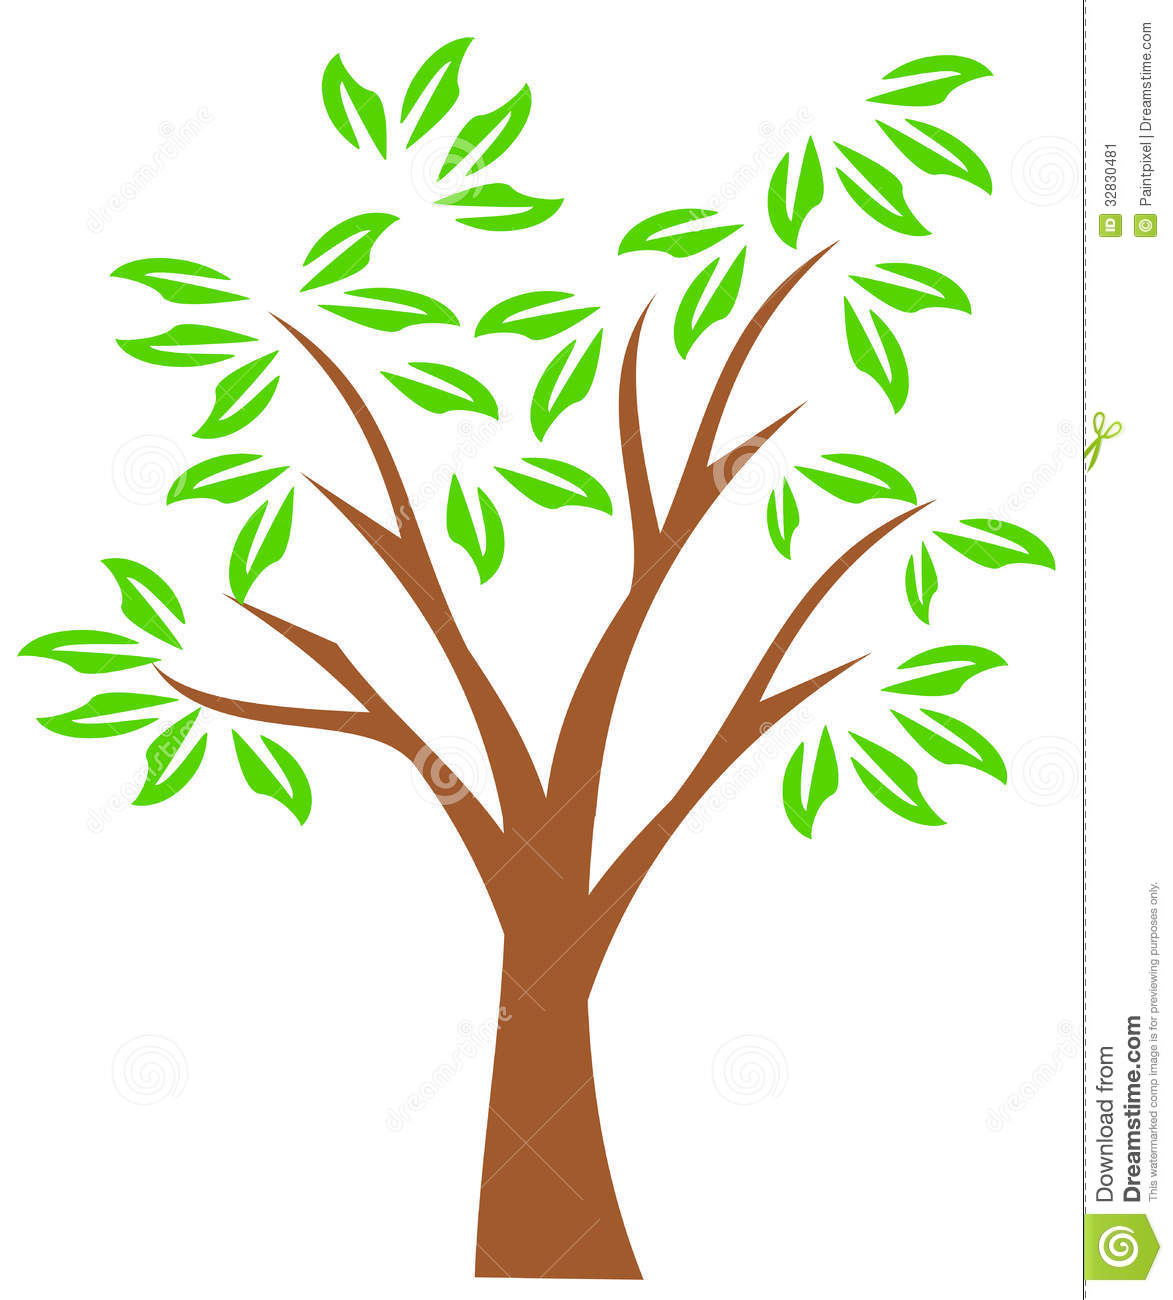 Clipart Family Tree   Clipart Panda   Free Clipart Images